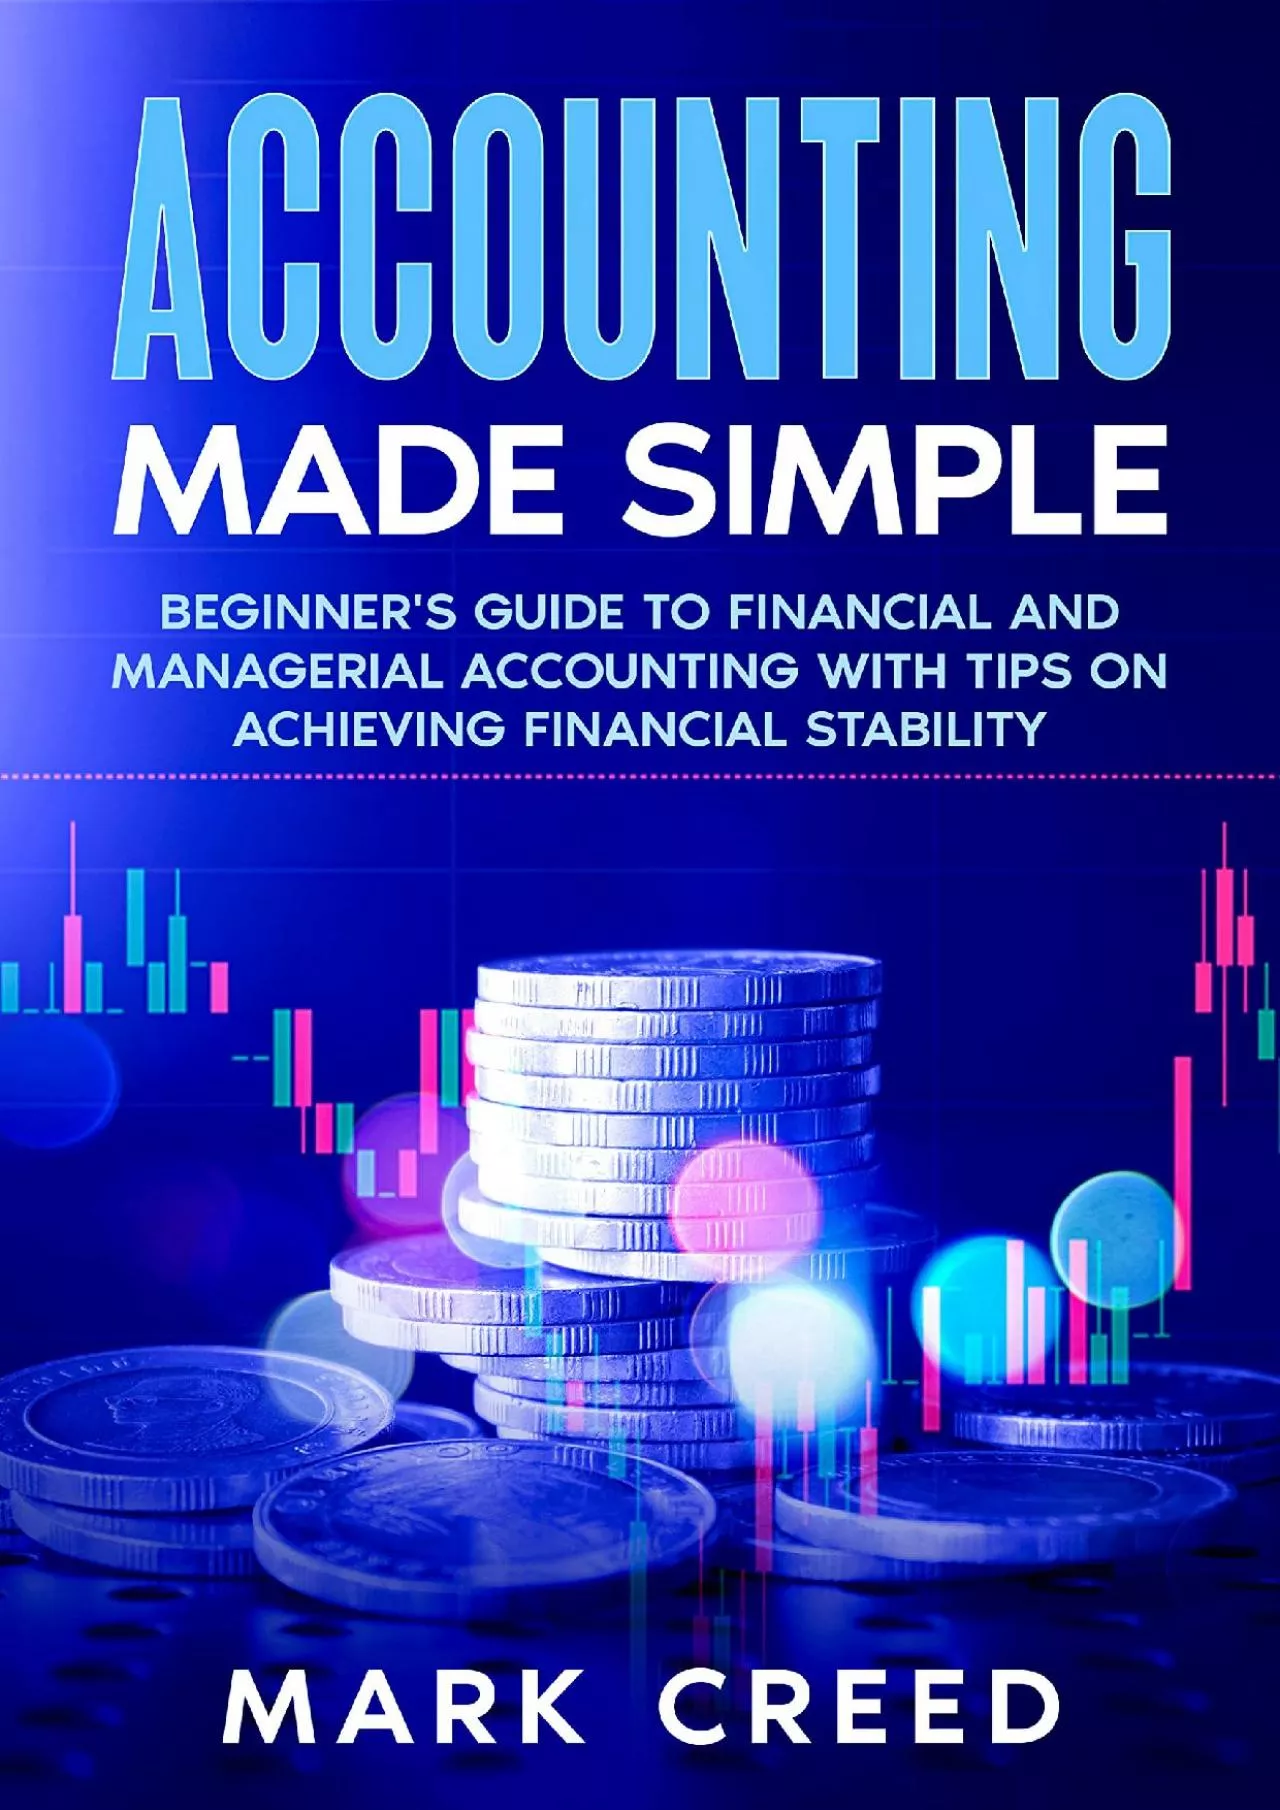 (EBOOK)-Accounting Made Simple: Beginner\'s Guide to Financial and Managerial Accounting